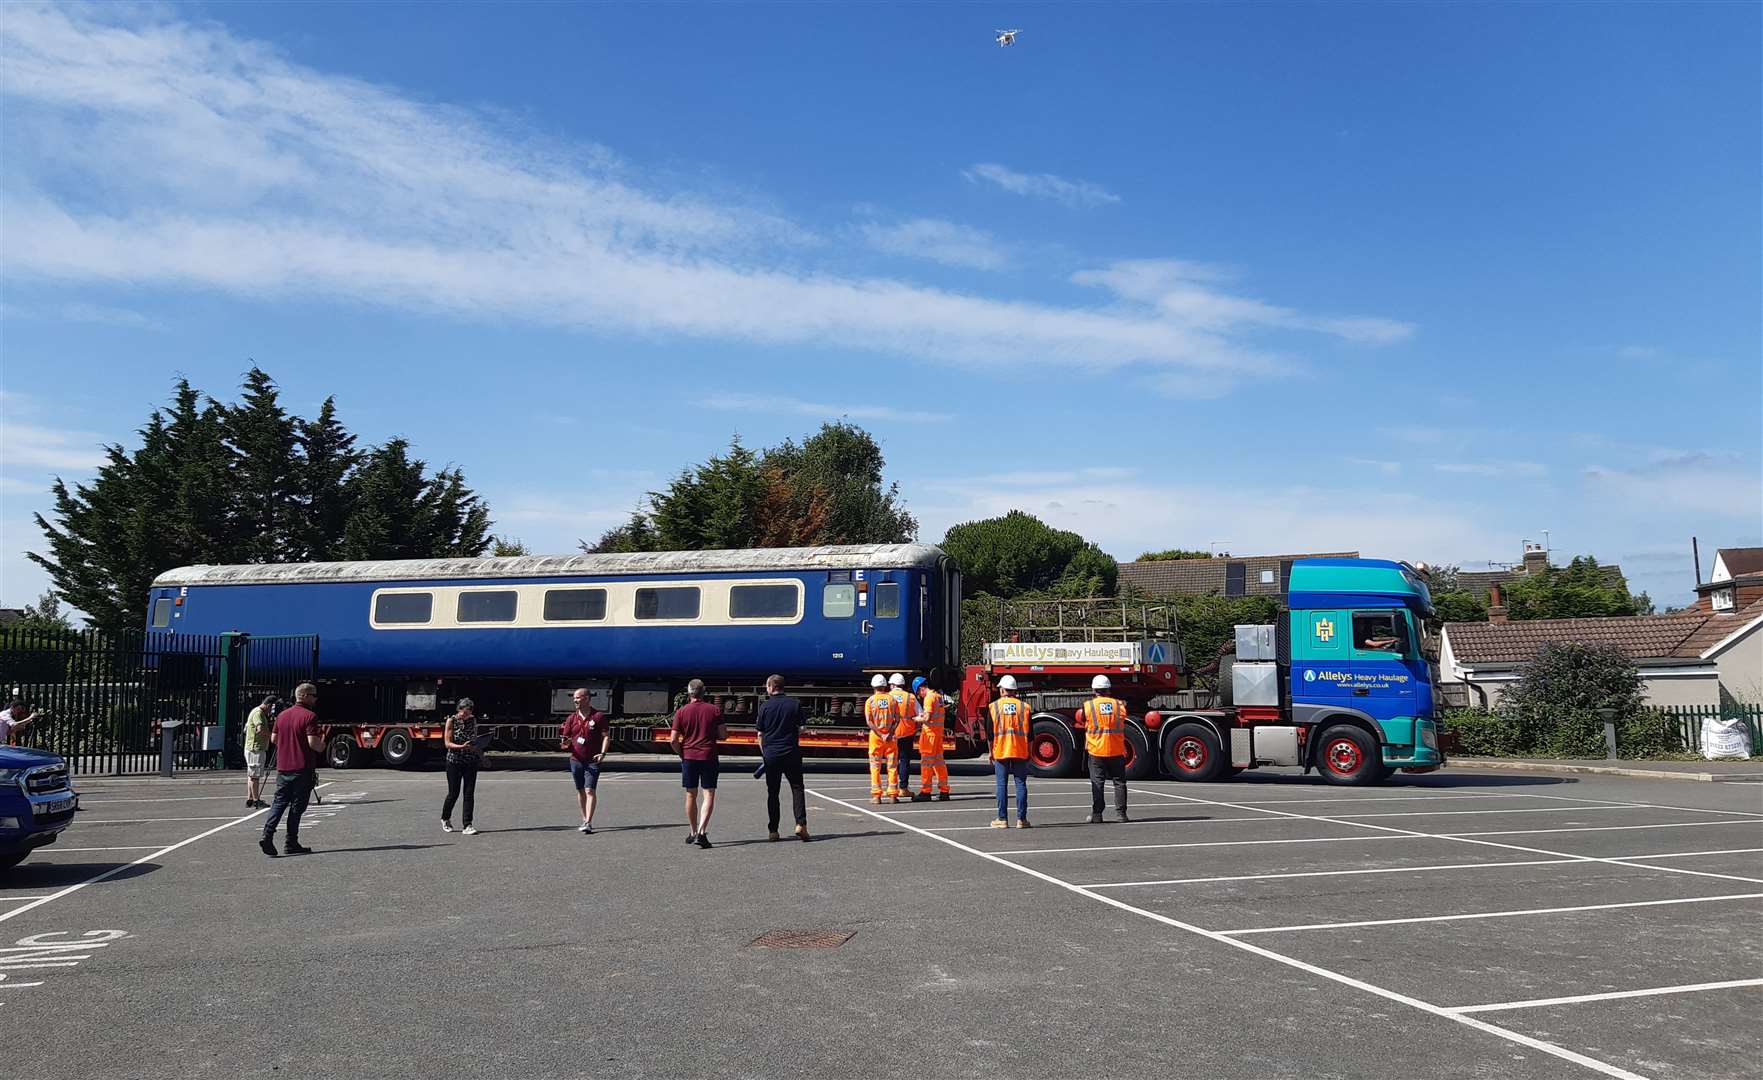 The 25-tonne train was transported through Maidstone town centre to Five Acre Wood School